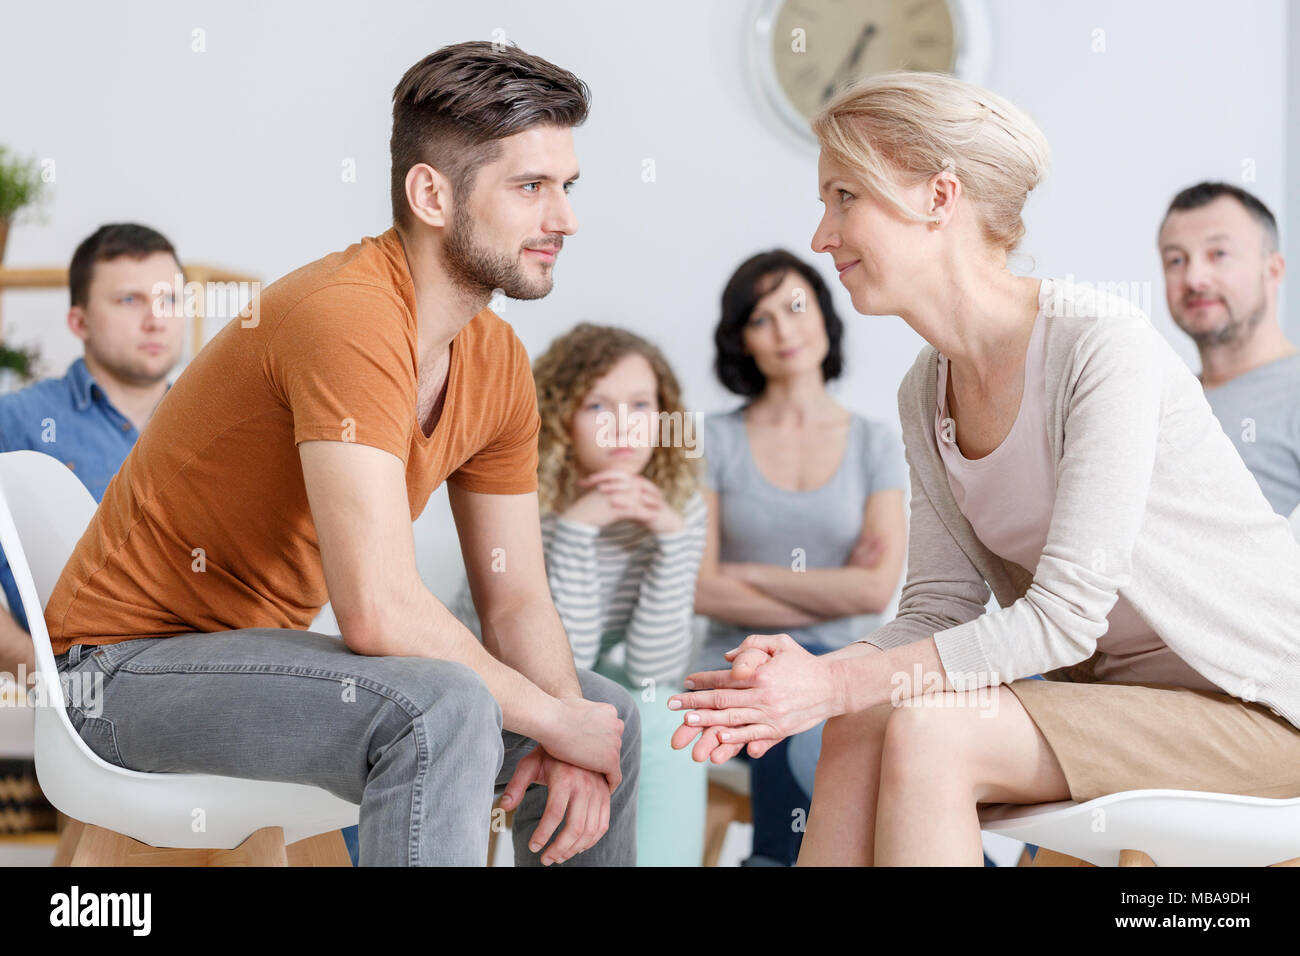 Young man and middle-aged woman sitting and looking into each other's eyes with other people in the background Stock Photo